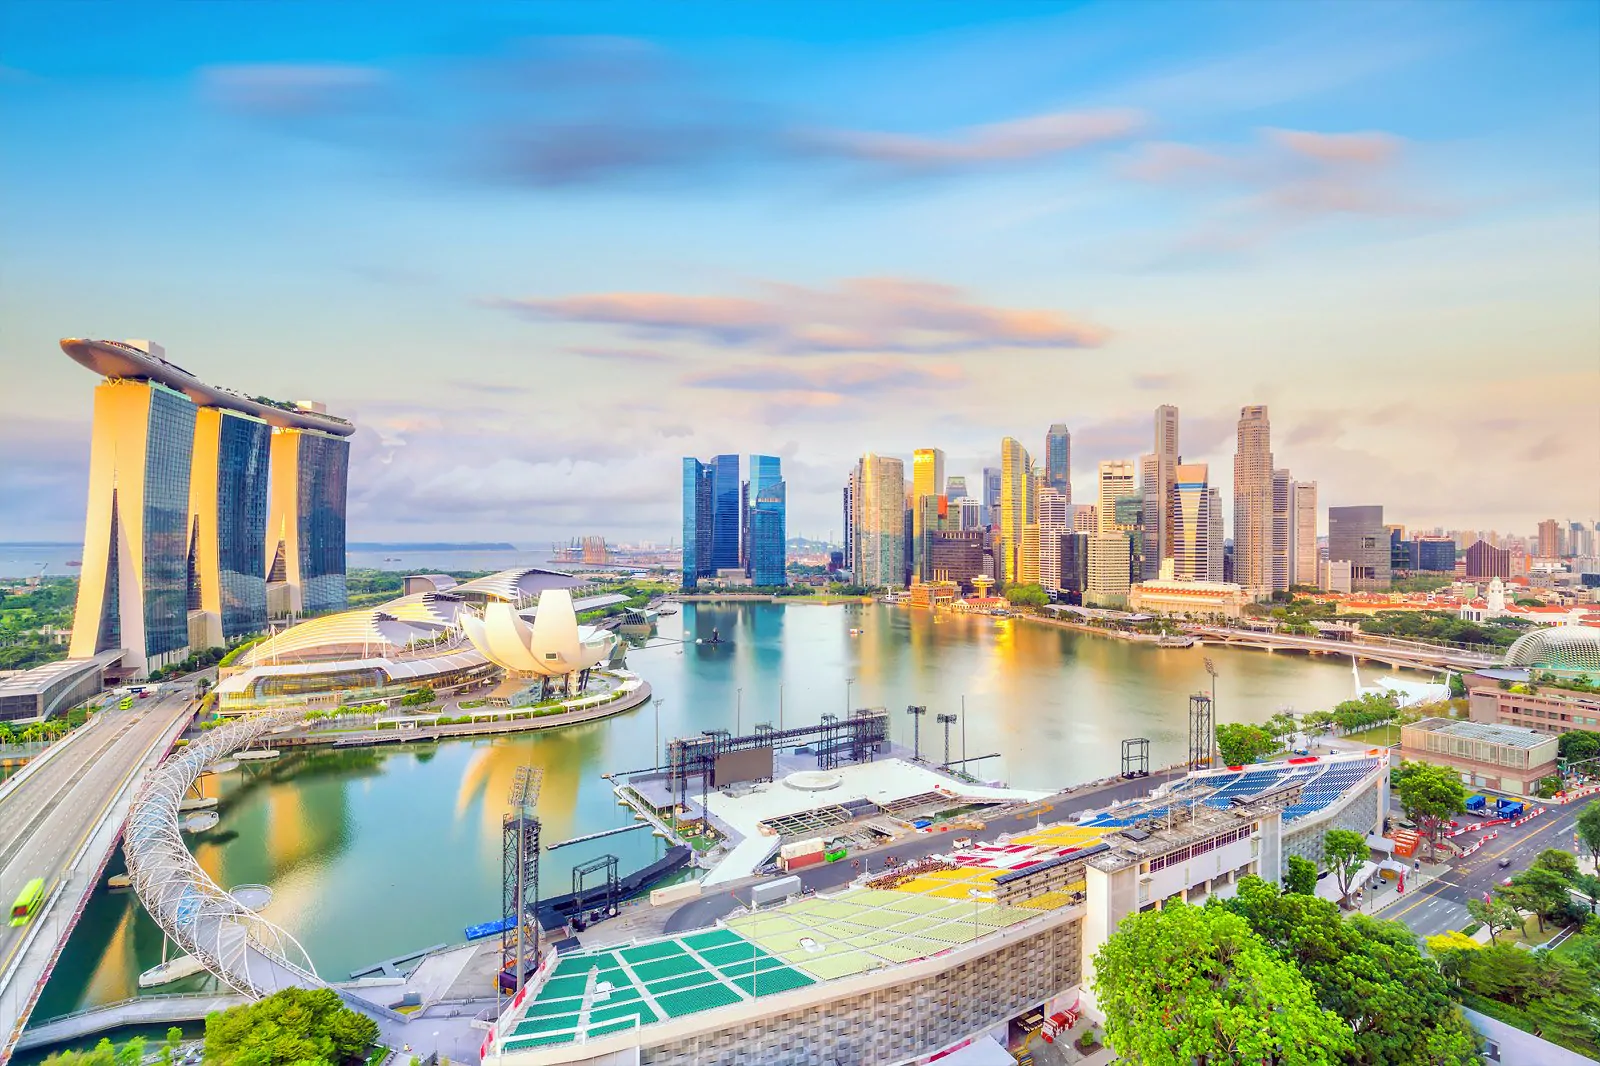 Unbeatable With Top Attractions in Singapore